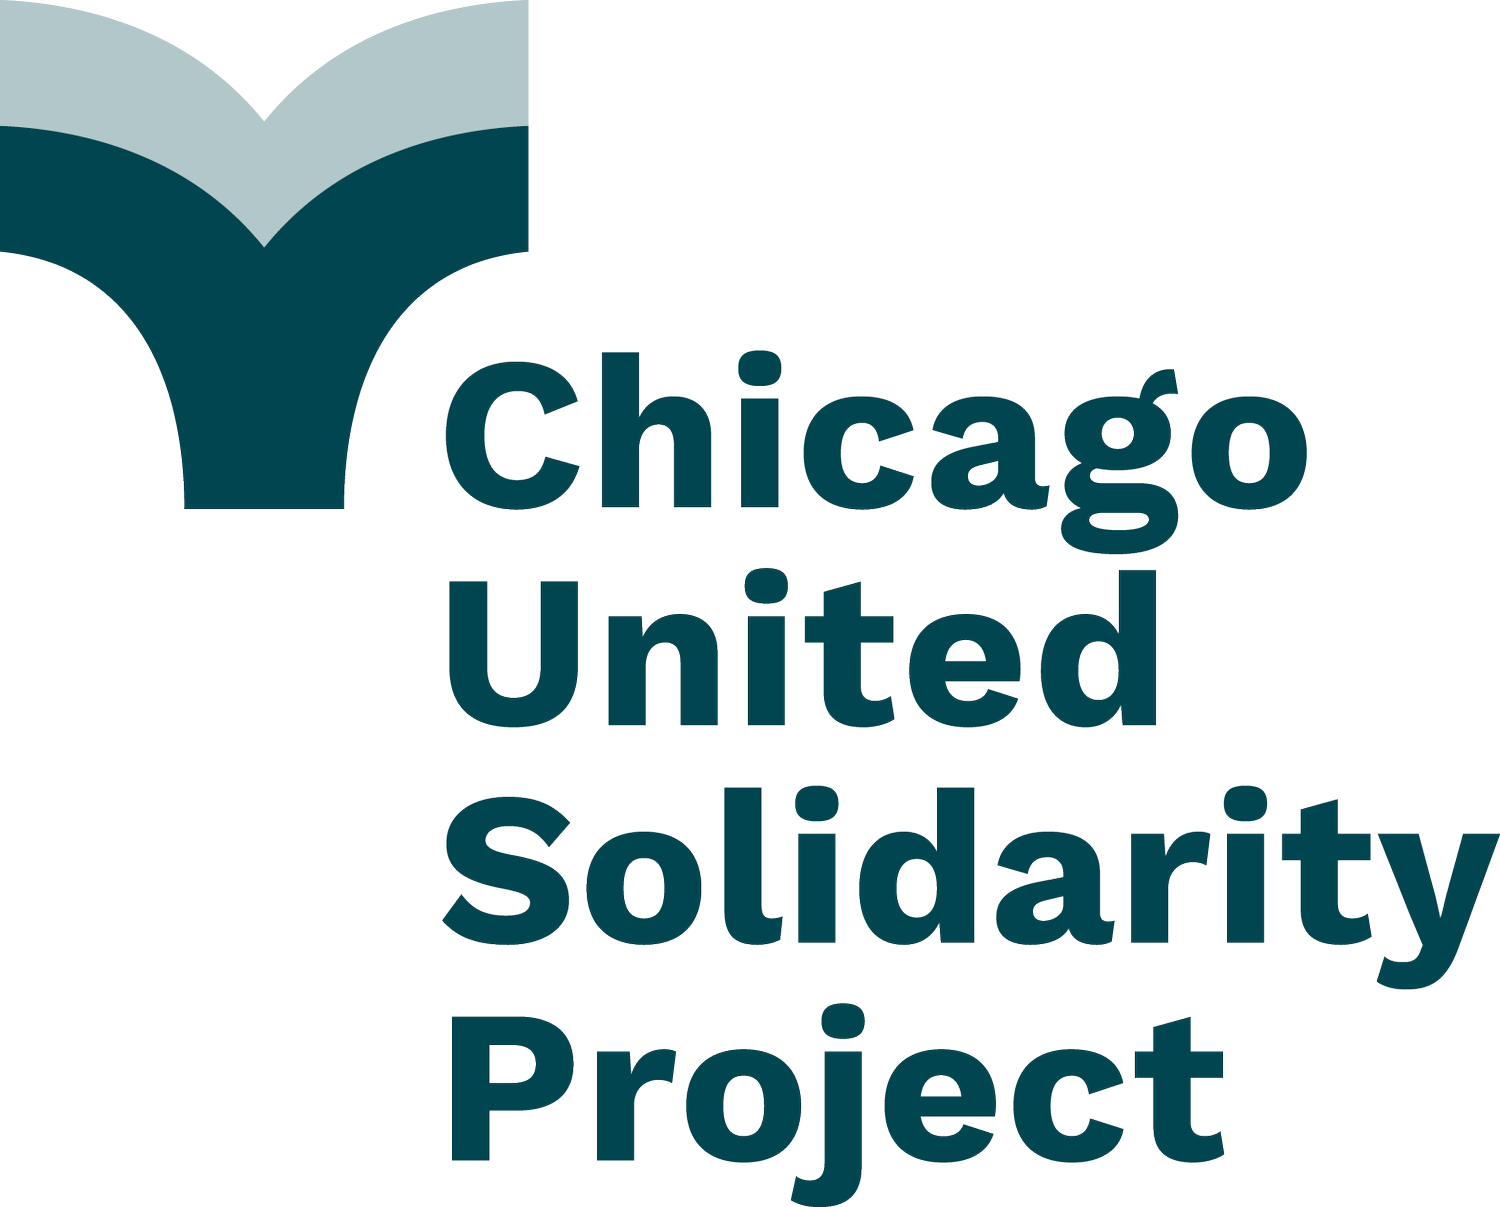 Chicago United Solidarity Project